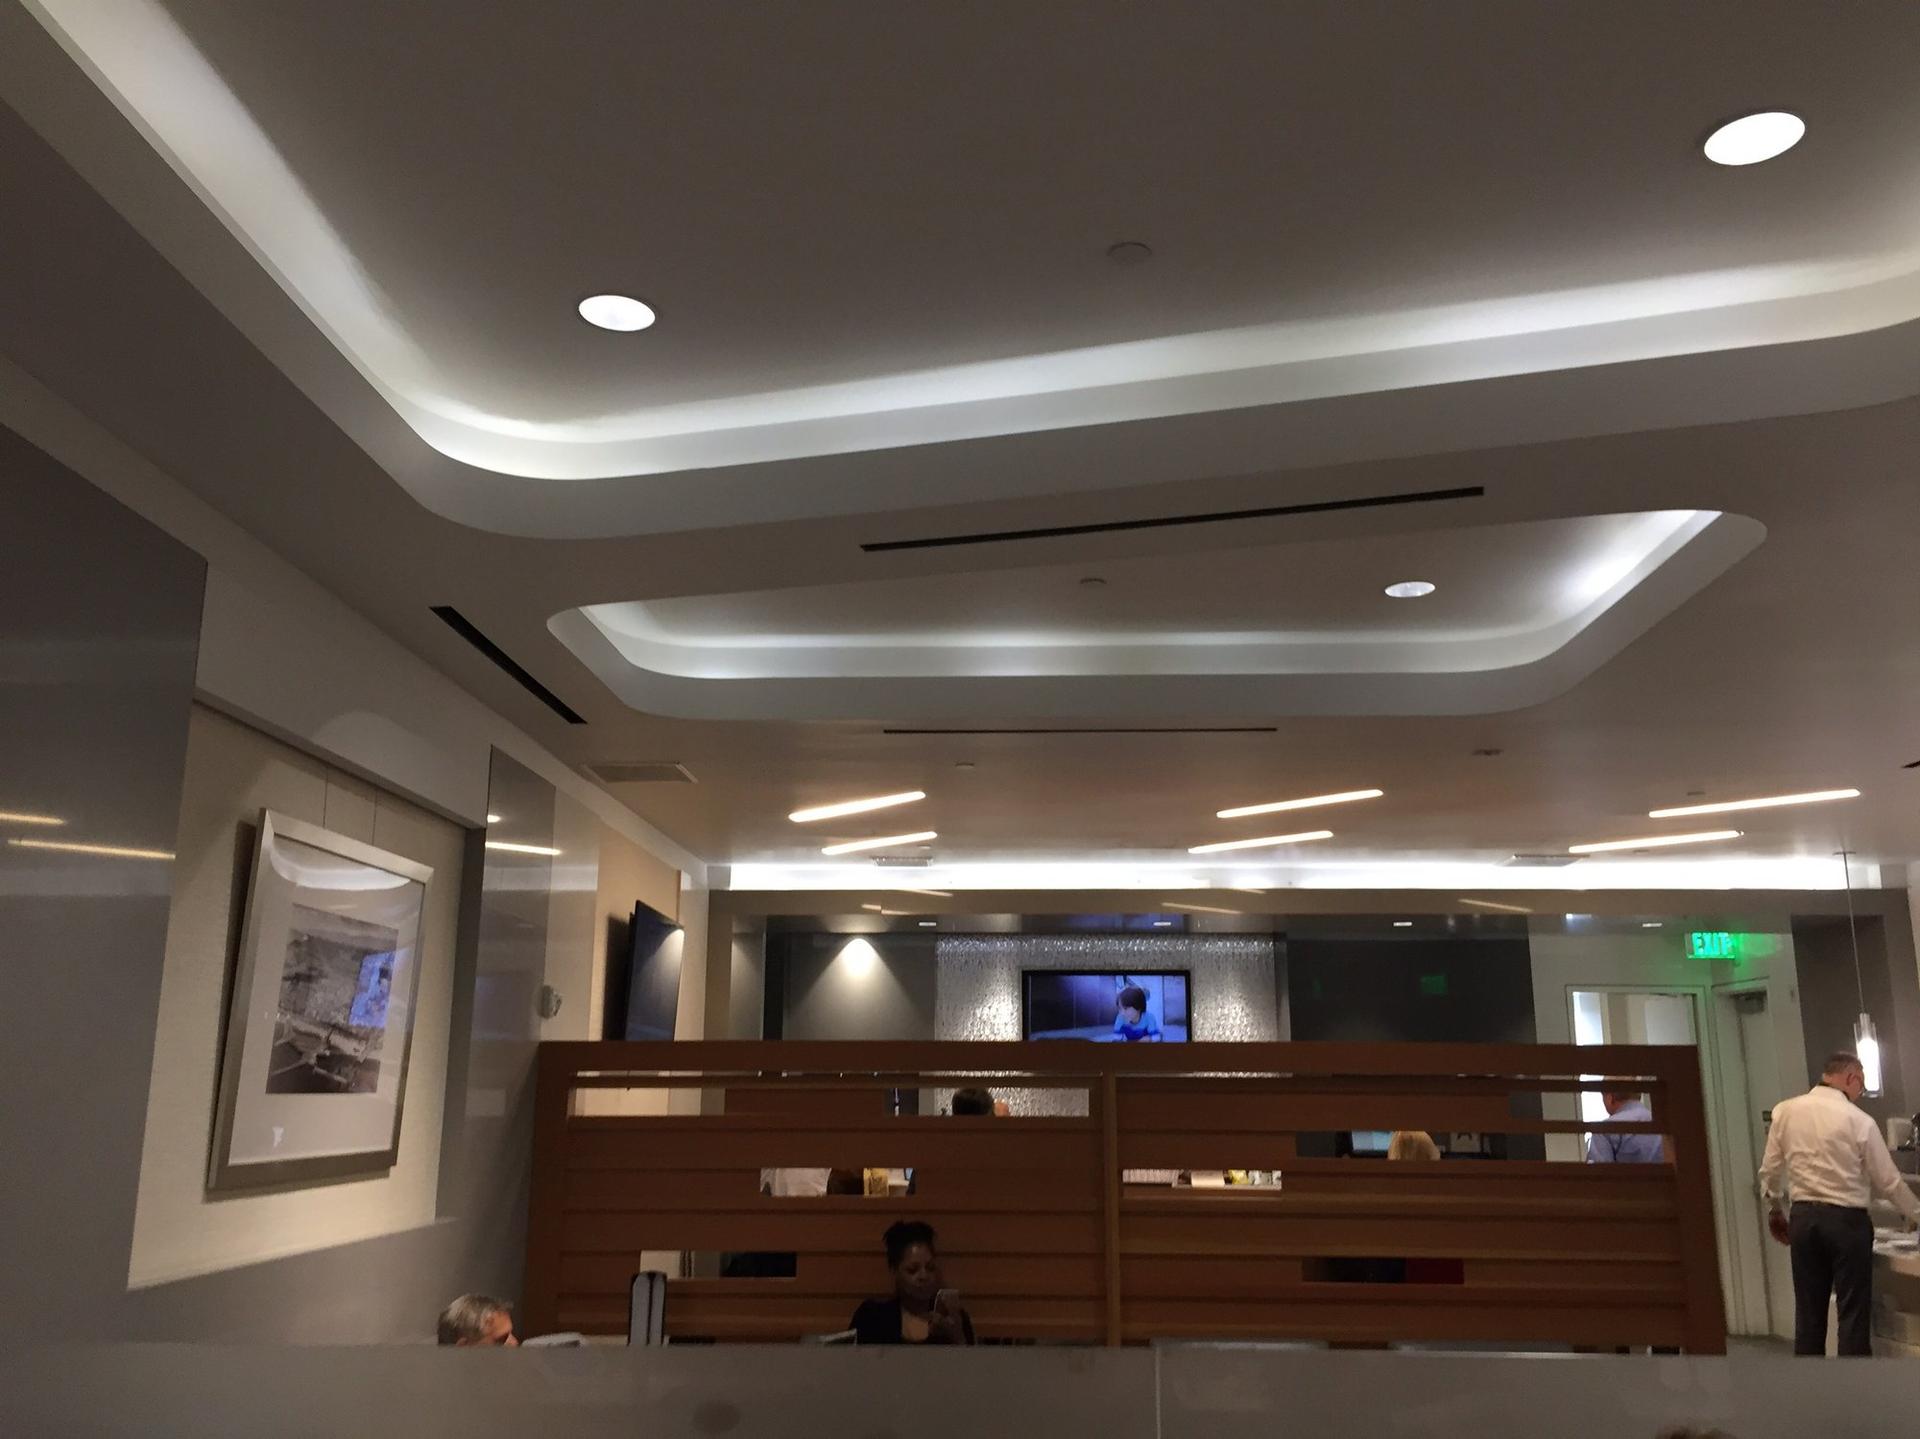 American Airlines Admirals Club image 38 of 43